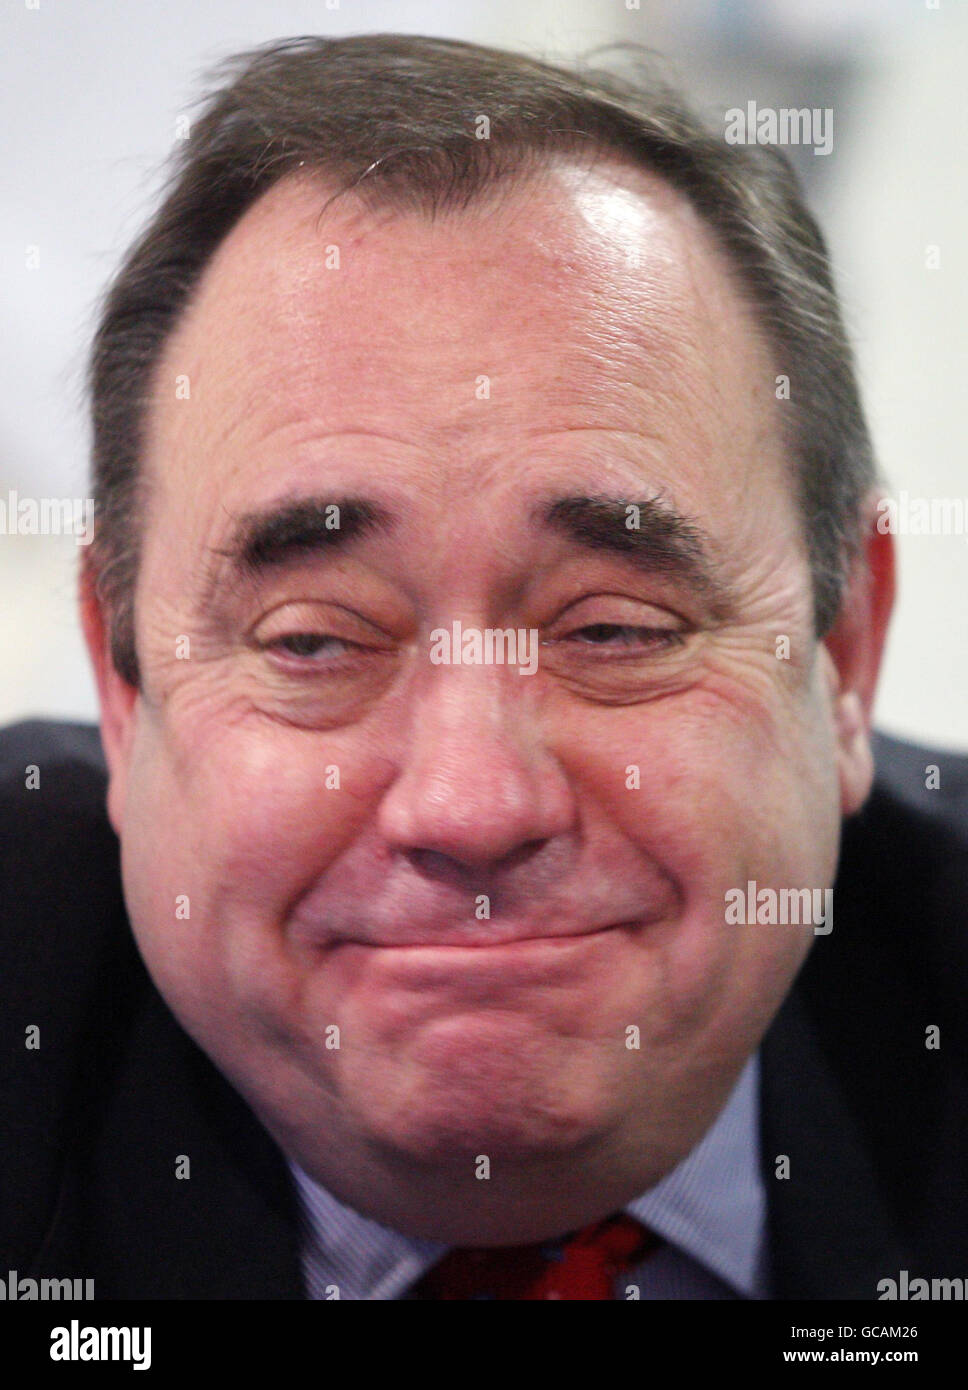 Scottish First Minister Alex Salmond during a visit to Lauriston Nursery, Dunfermline, where he celebrated it's first anniversary. Stock Photo